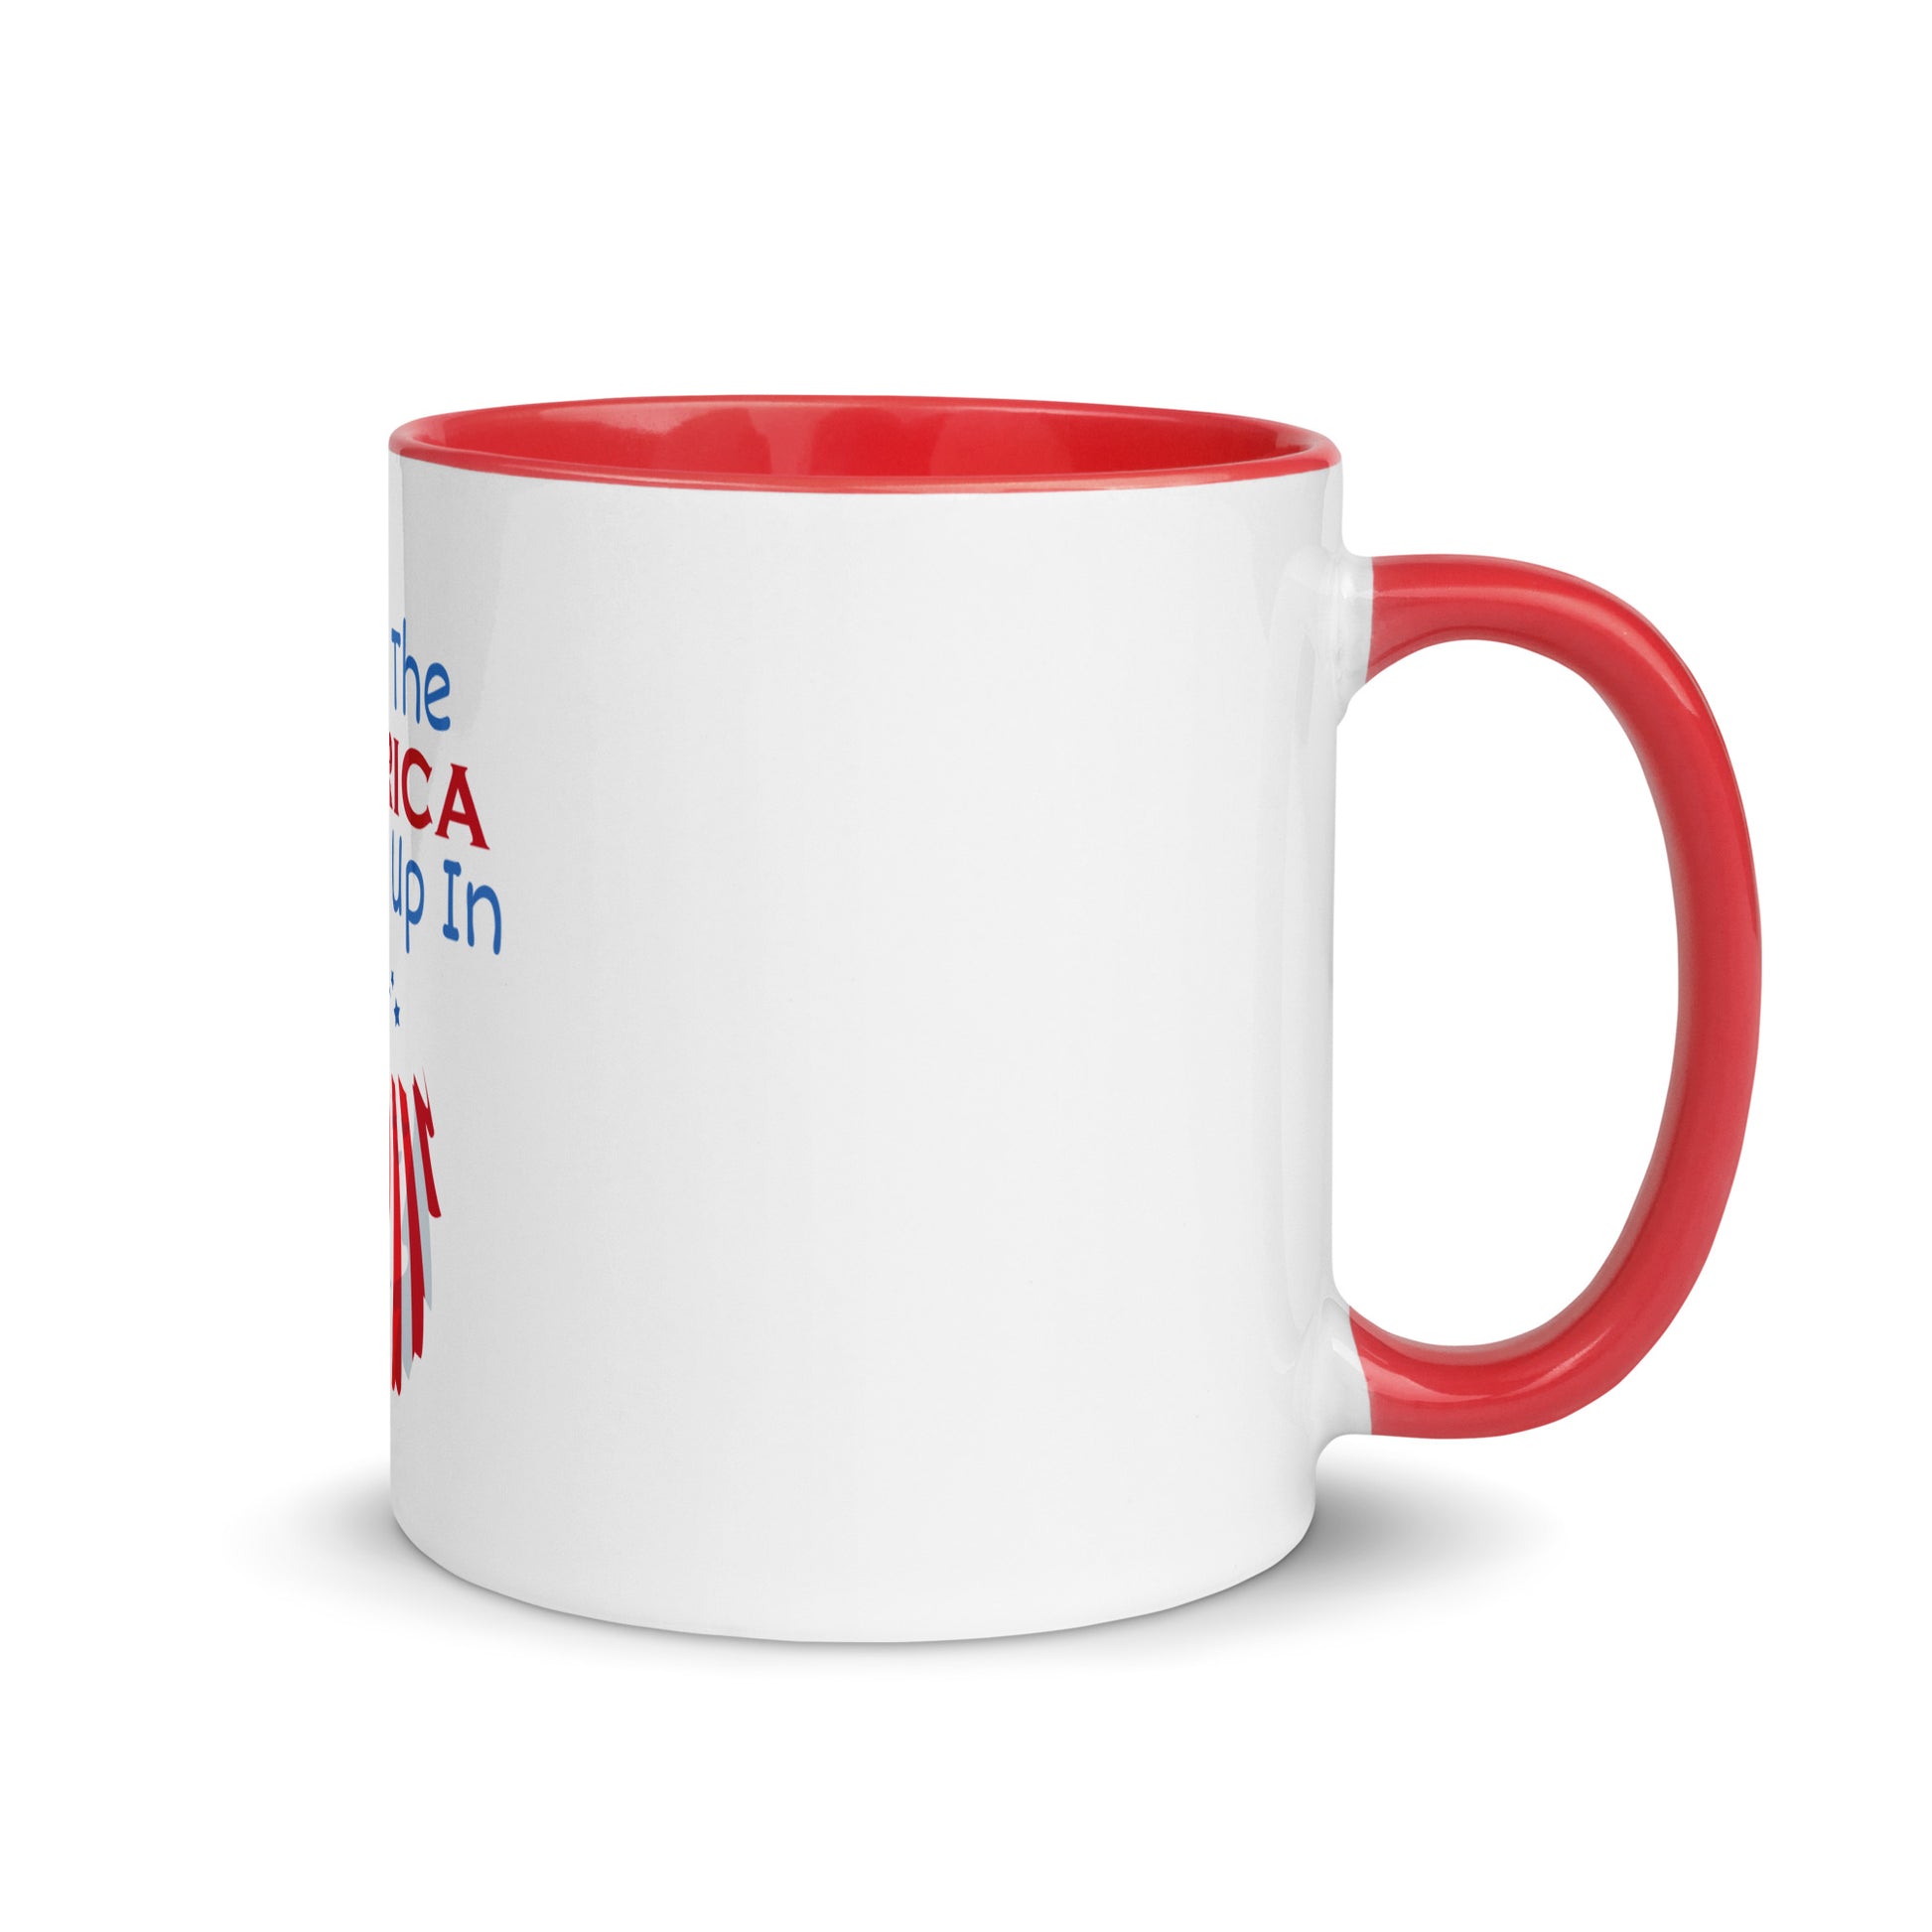 Patriotic coffee mug with color rim and handle for daily use